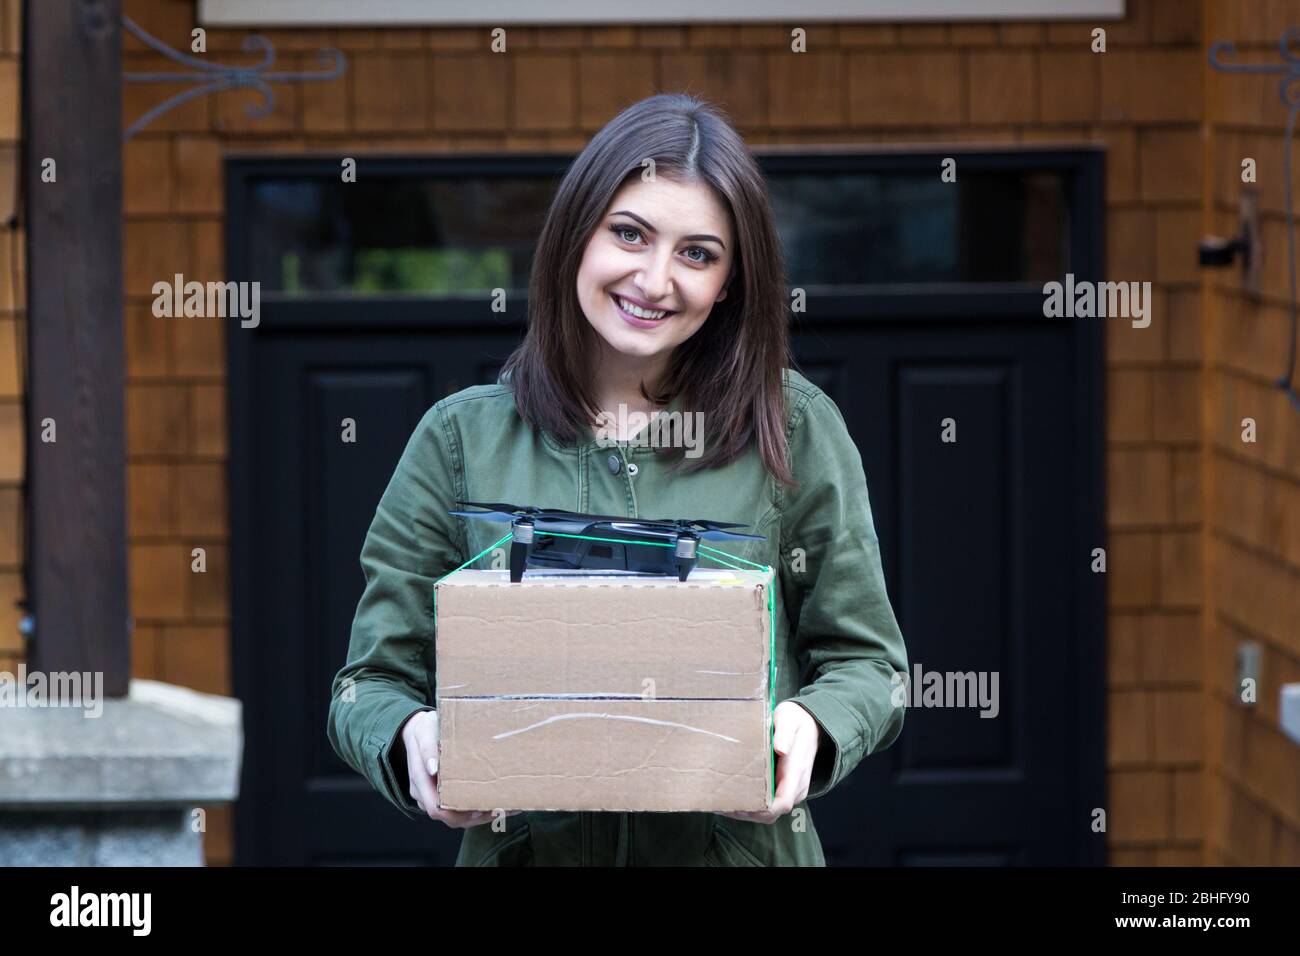 Attractive smiling young brunette woman holding a package that has been delivered by an autonomous drone. Stock Photo